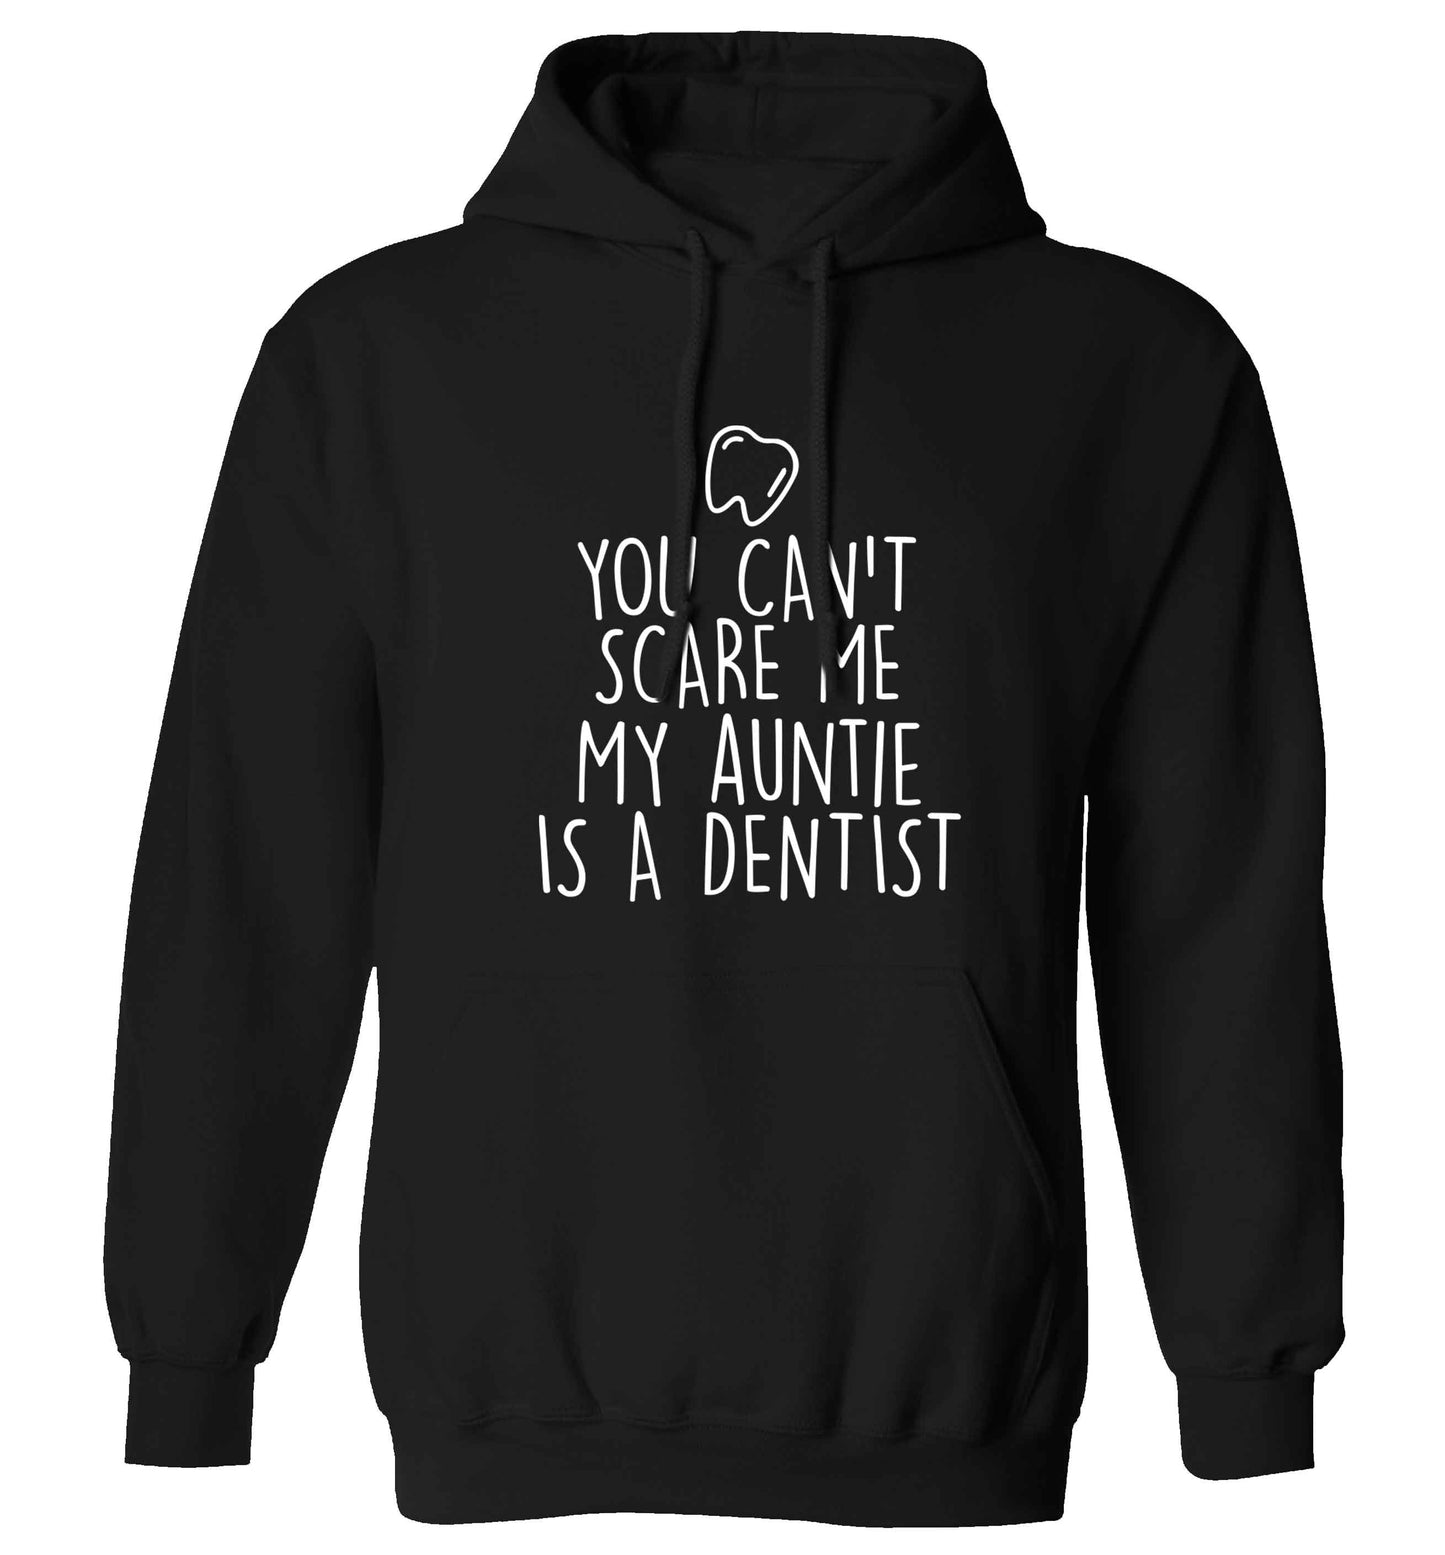 You can't scare me my auntie is a dentist adults unisex black hoodie 2XL